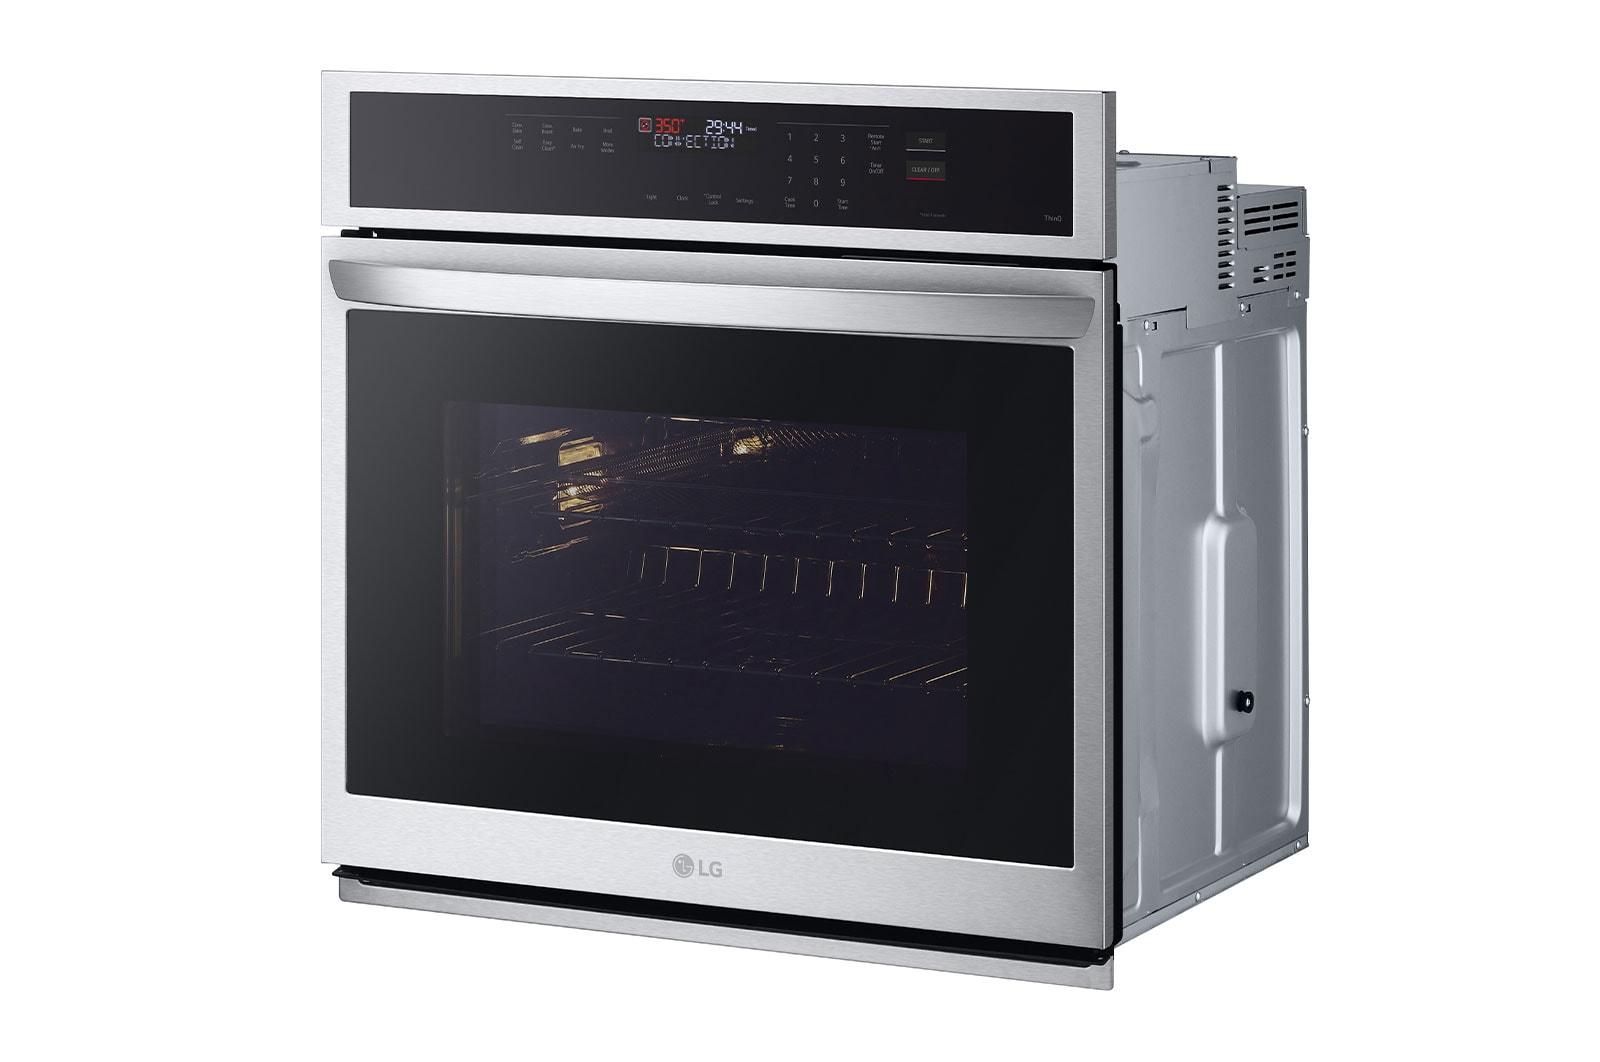 Lg 4.7 cu. ft. Smart Wall Oven with Convection and Air Fry